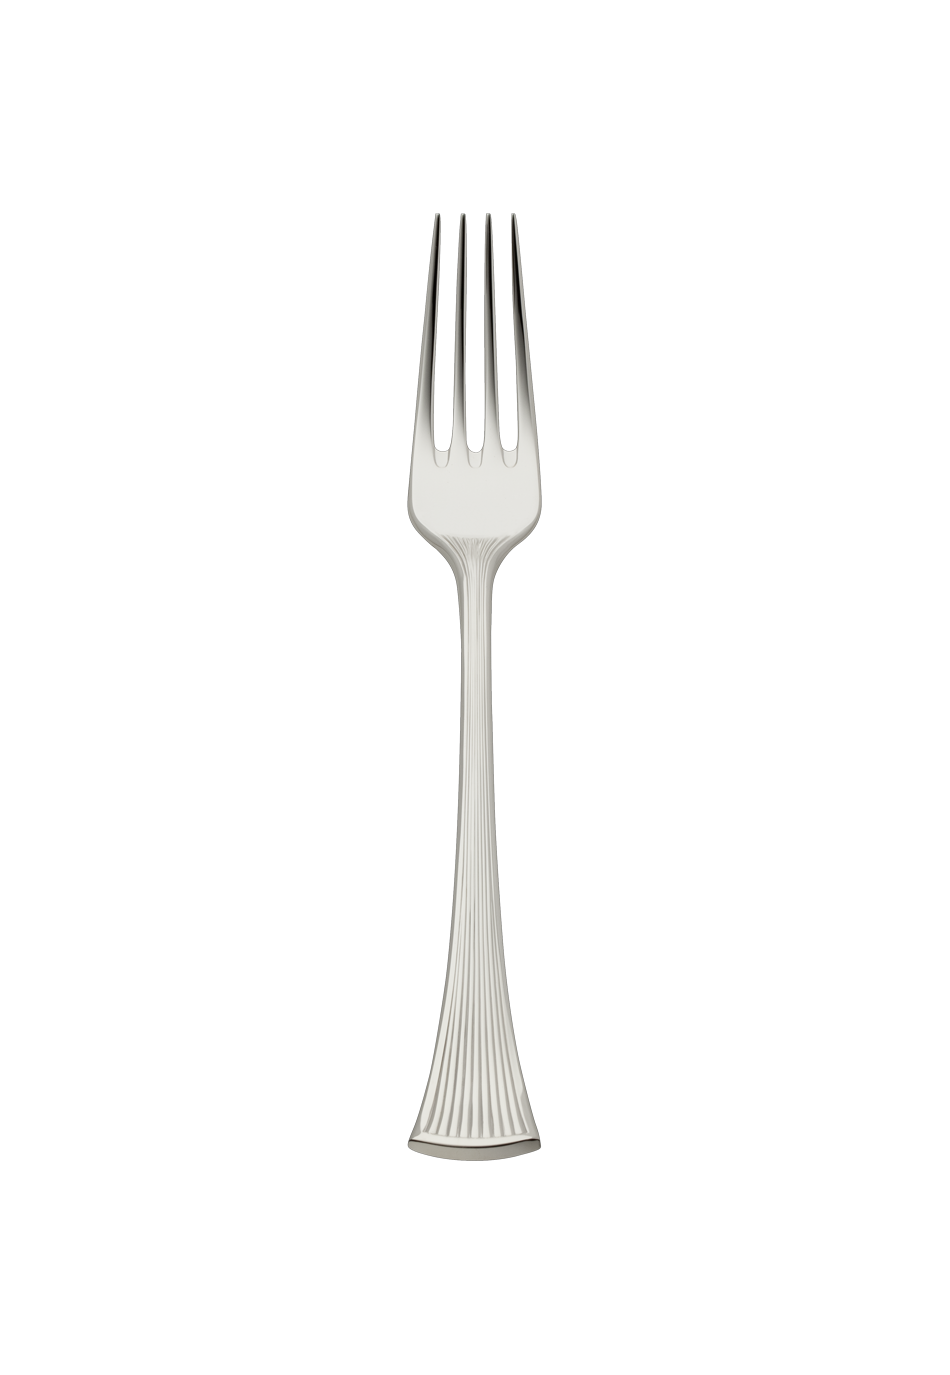 Avenue Table Fork (150g massive silverplated)